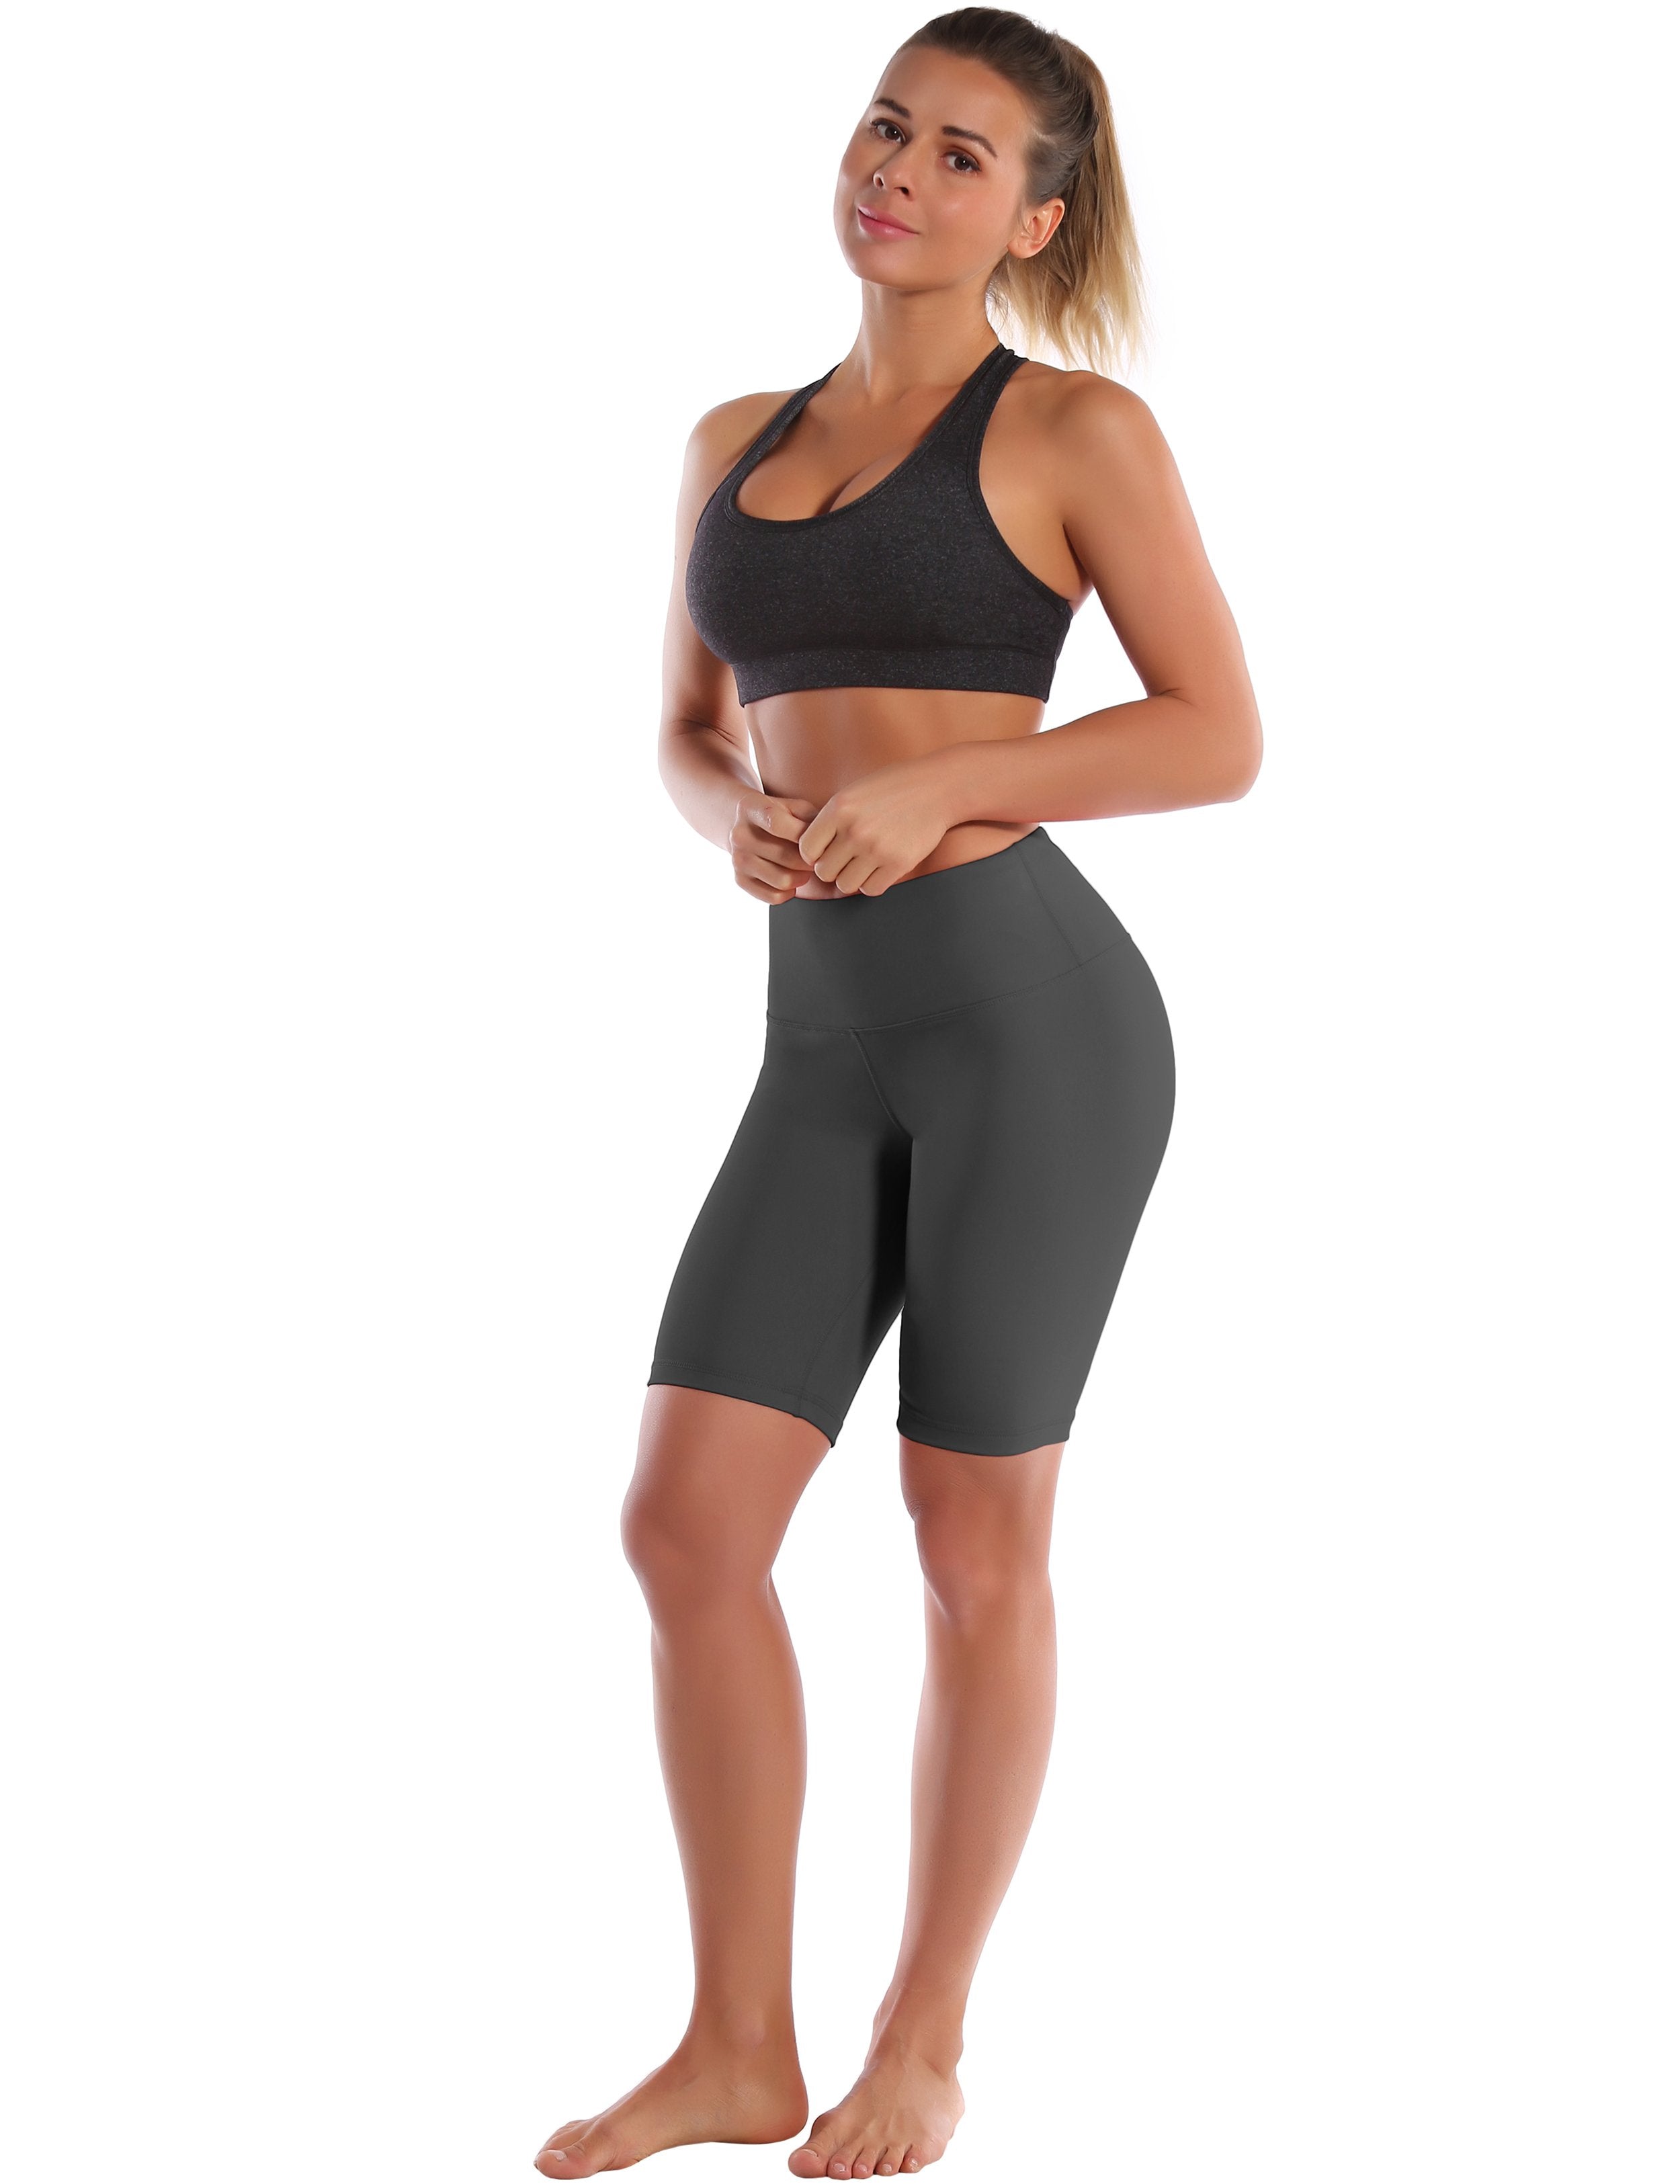 8" High Waist Tall Size Shorts shadowcharcoal Sleek, soft, smooth and totally comfortable: our newest style is here. Softest-ever fabric High elasticity High density 4-way stretch Fabric doesn't attract lint easily No see-through Moisture-wicking Machine wash 75% Nylon, 25% Spandex